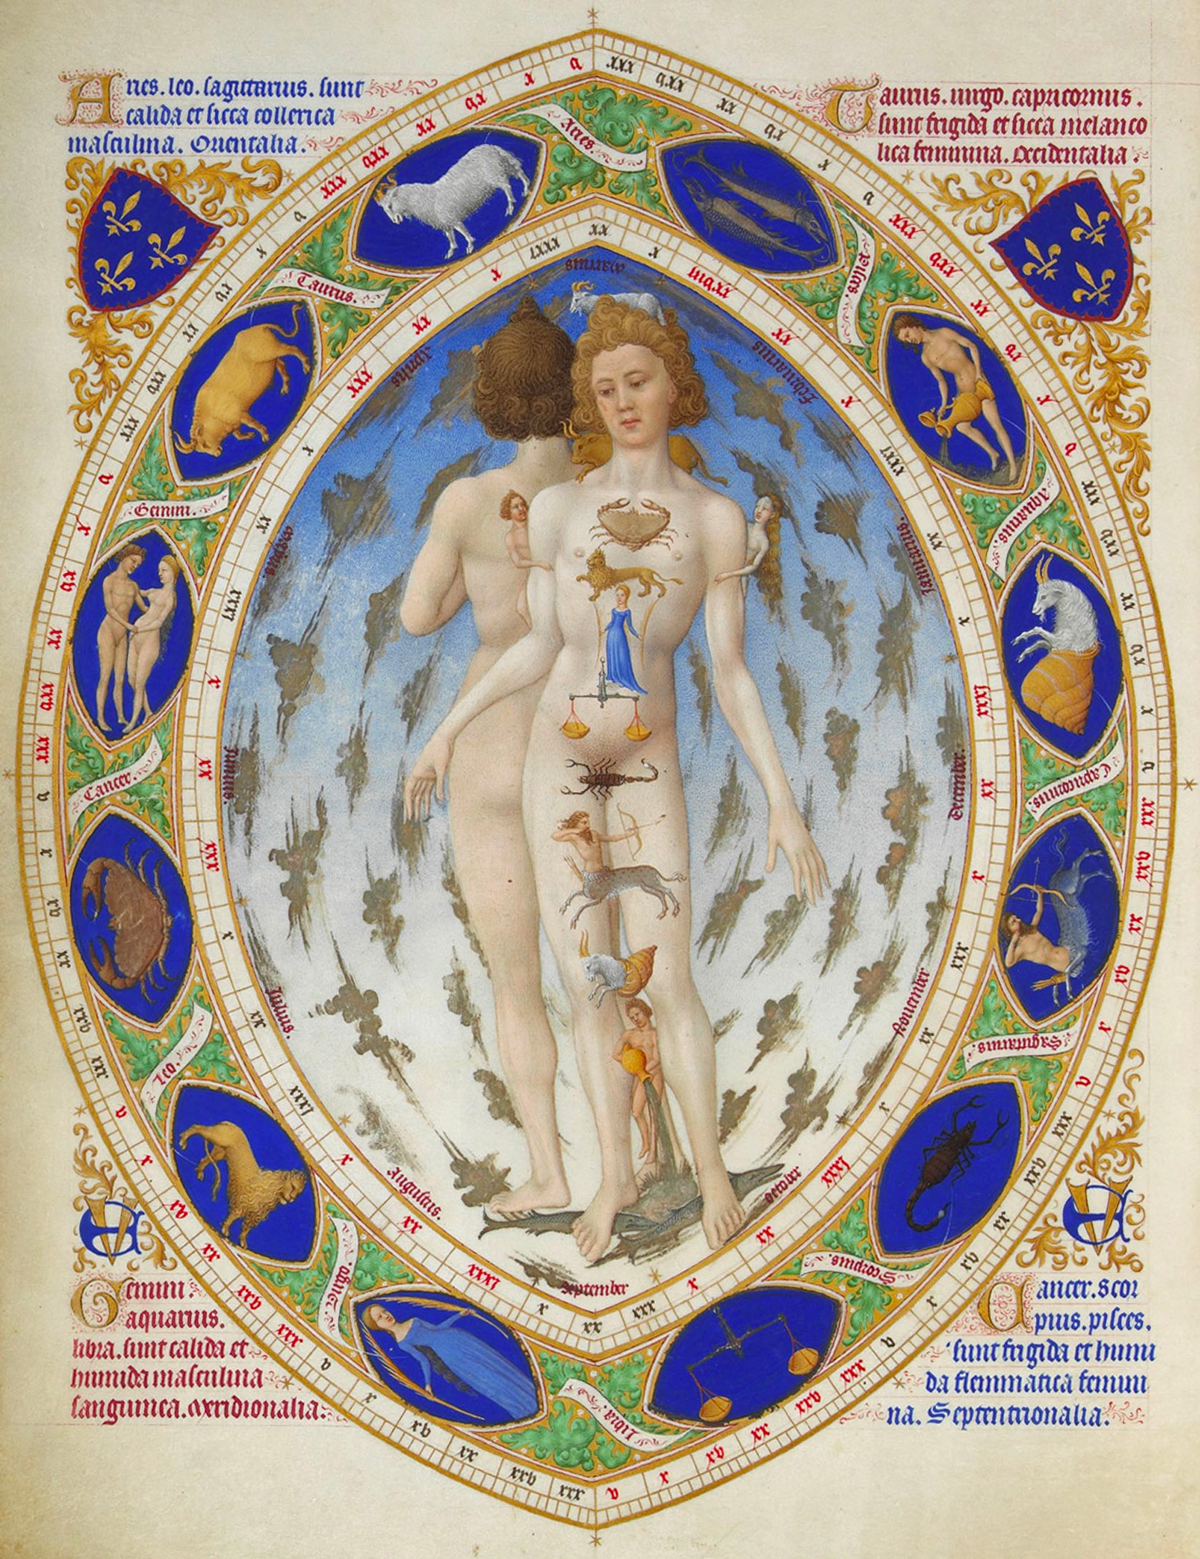 Zodiac Man appeared in medical journals to help medieval physicians link the body to the heavens. (Wikimedia Commons)